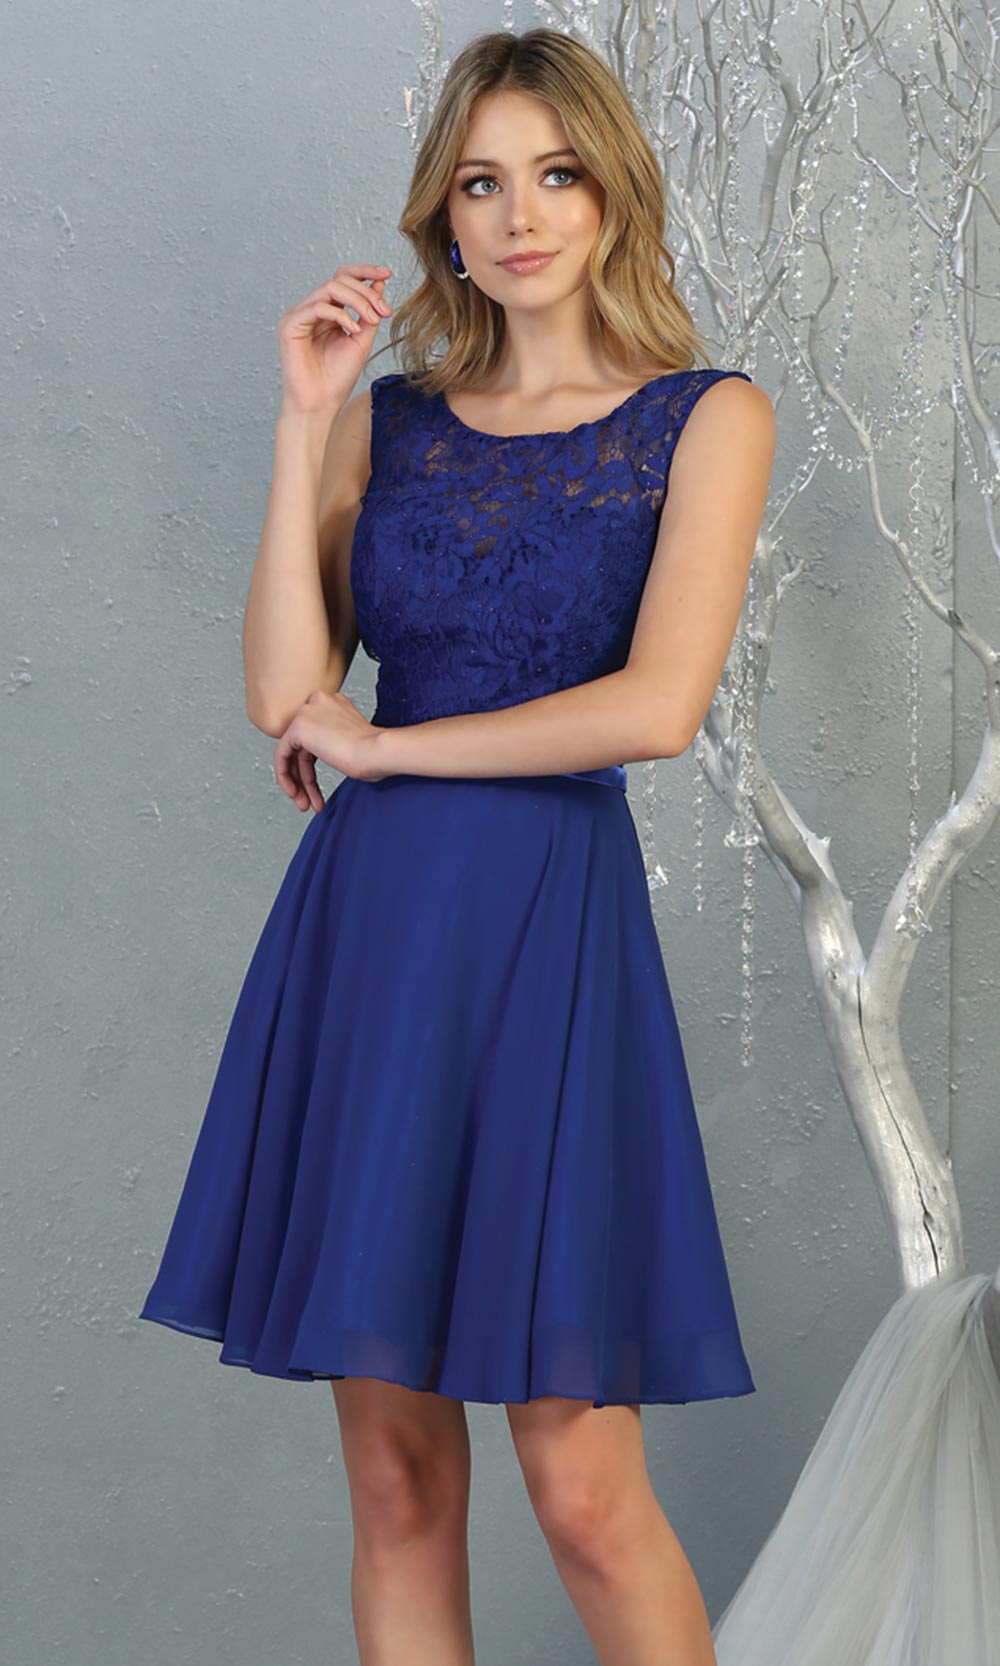 Mayqueen MQ1814 short royal blue high neck flowy grade 8 graduation dress w/ corset & simple skirt. Royal blue party dress is perfect for prom, graduation, grade 8 grad, confirmation dress, bat mitzvah dress, damas. Plus sizes avail for grad dress.jpggrade 8 grad dresses, graduation dresses